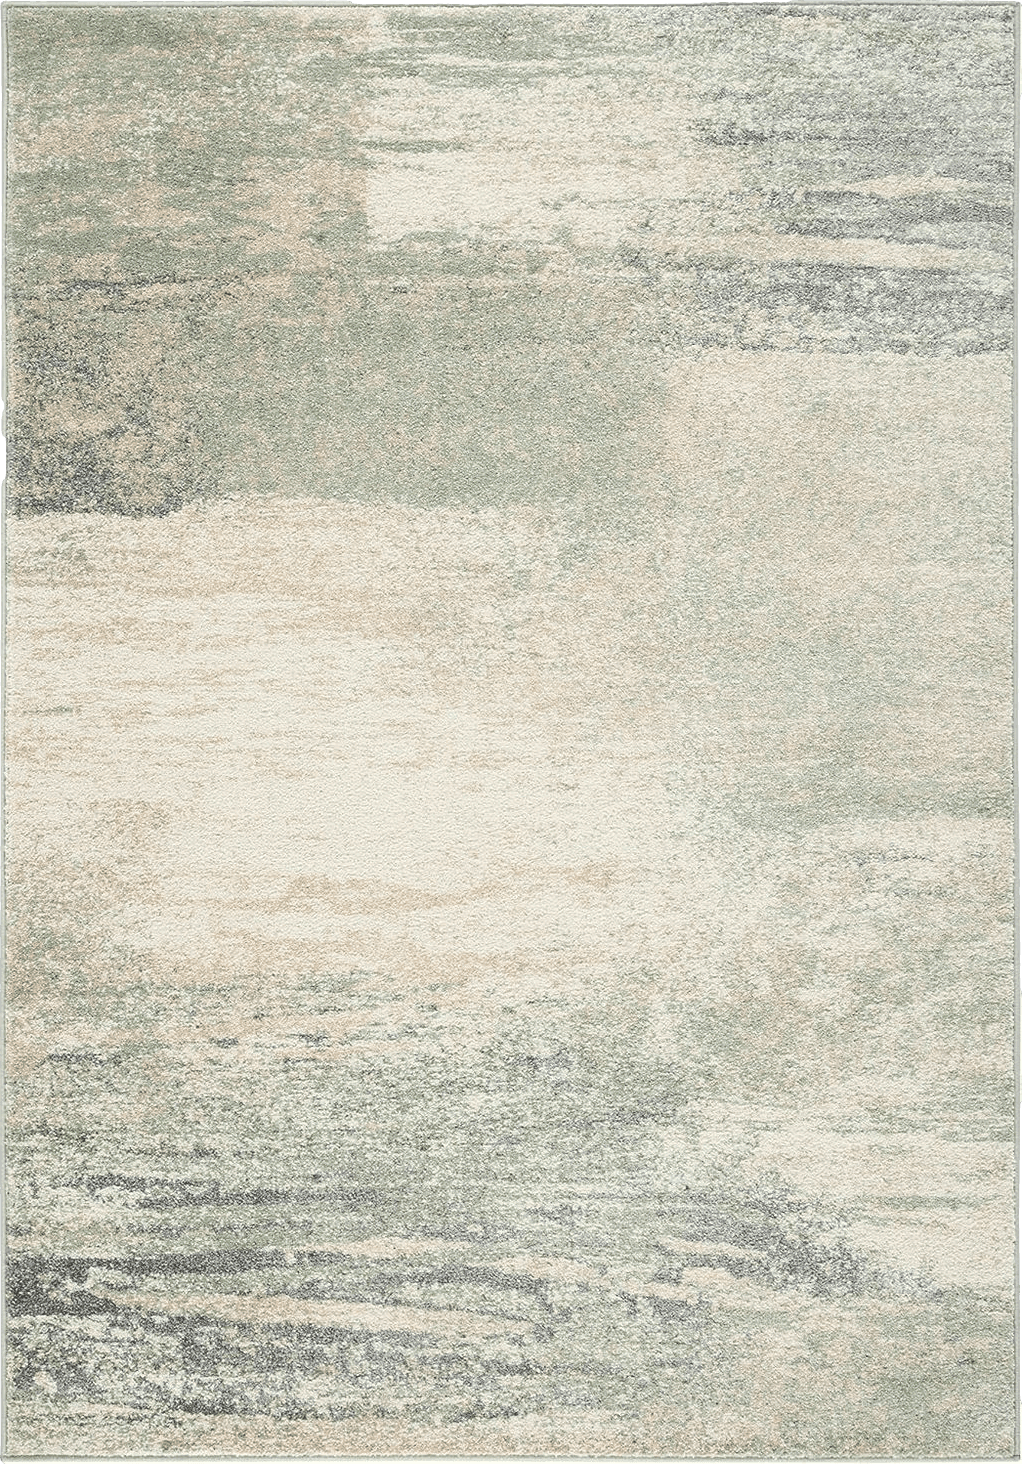 Green SAFAVIEH Adirondack Collection Area Rug - 6' x 9', Ivory & Sage, Modern Abstract Design, Non-Shedding & Easy Care, Ideal for High Traffic Areas in Living Room, Bedroom (ADR112W)